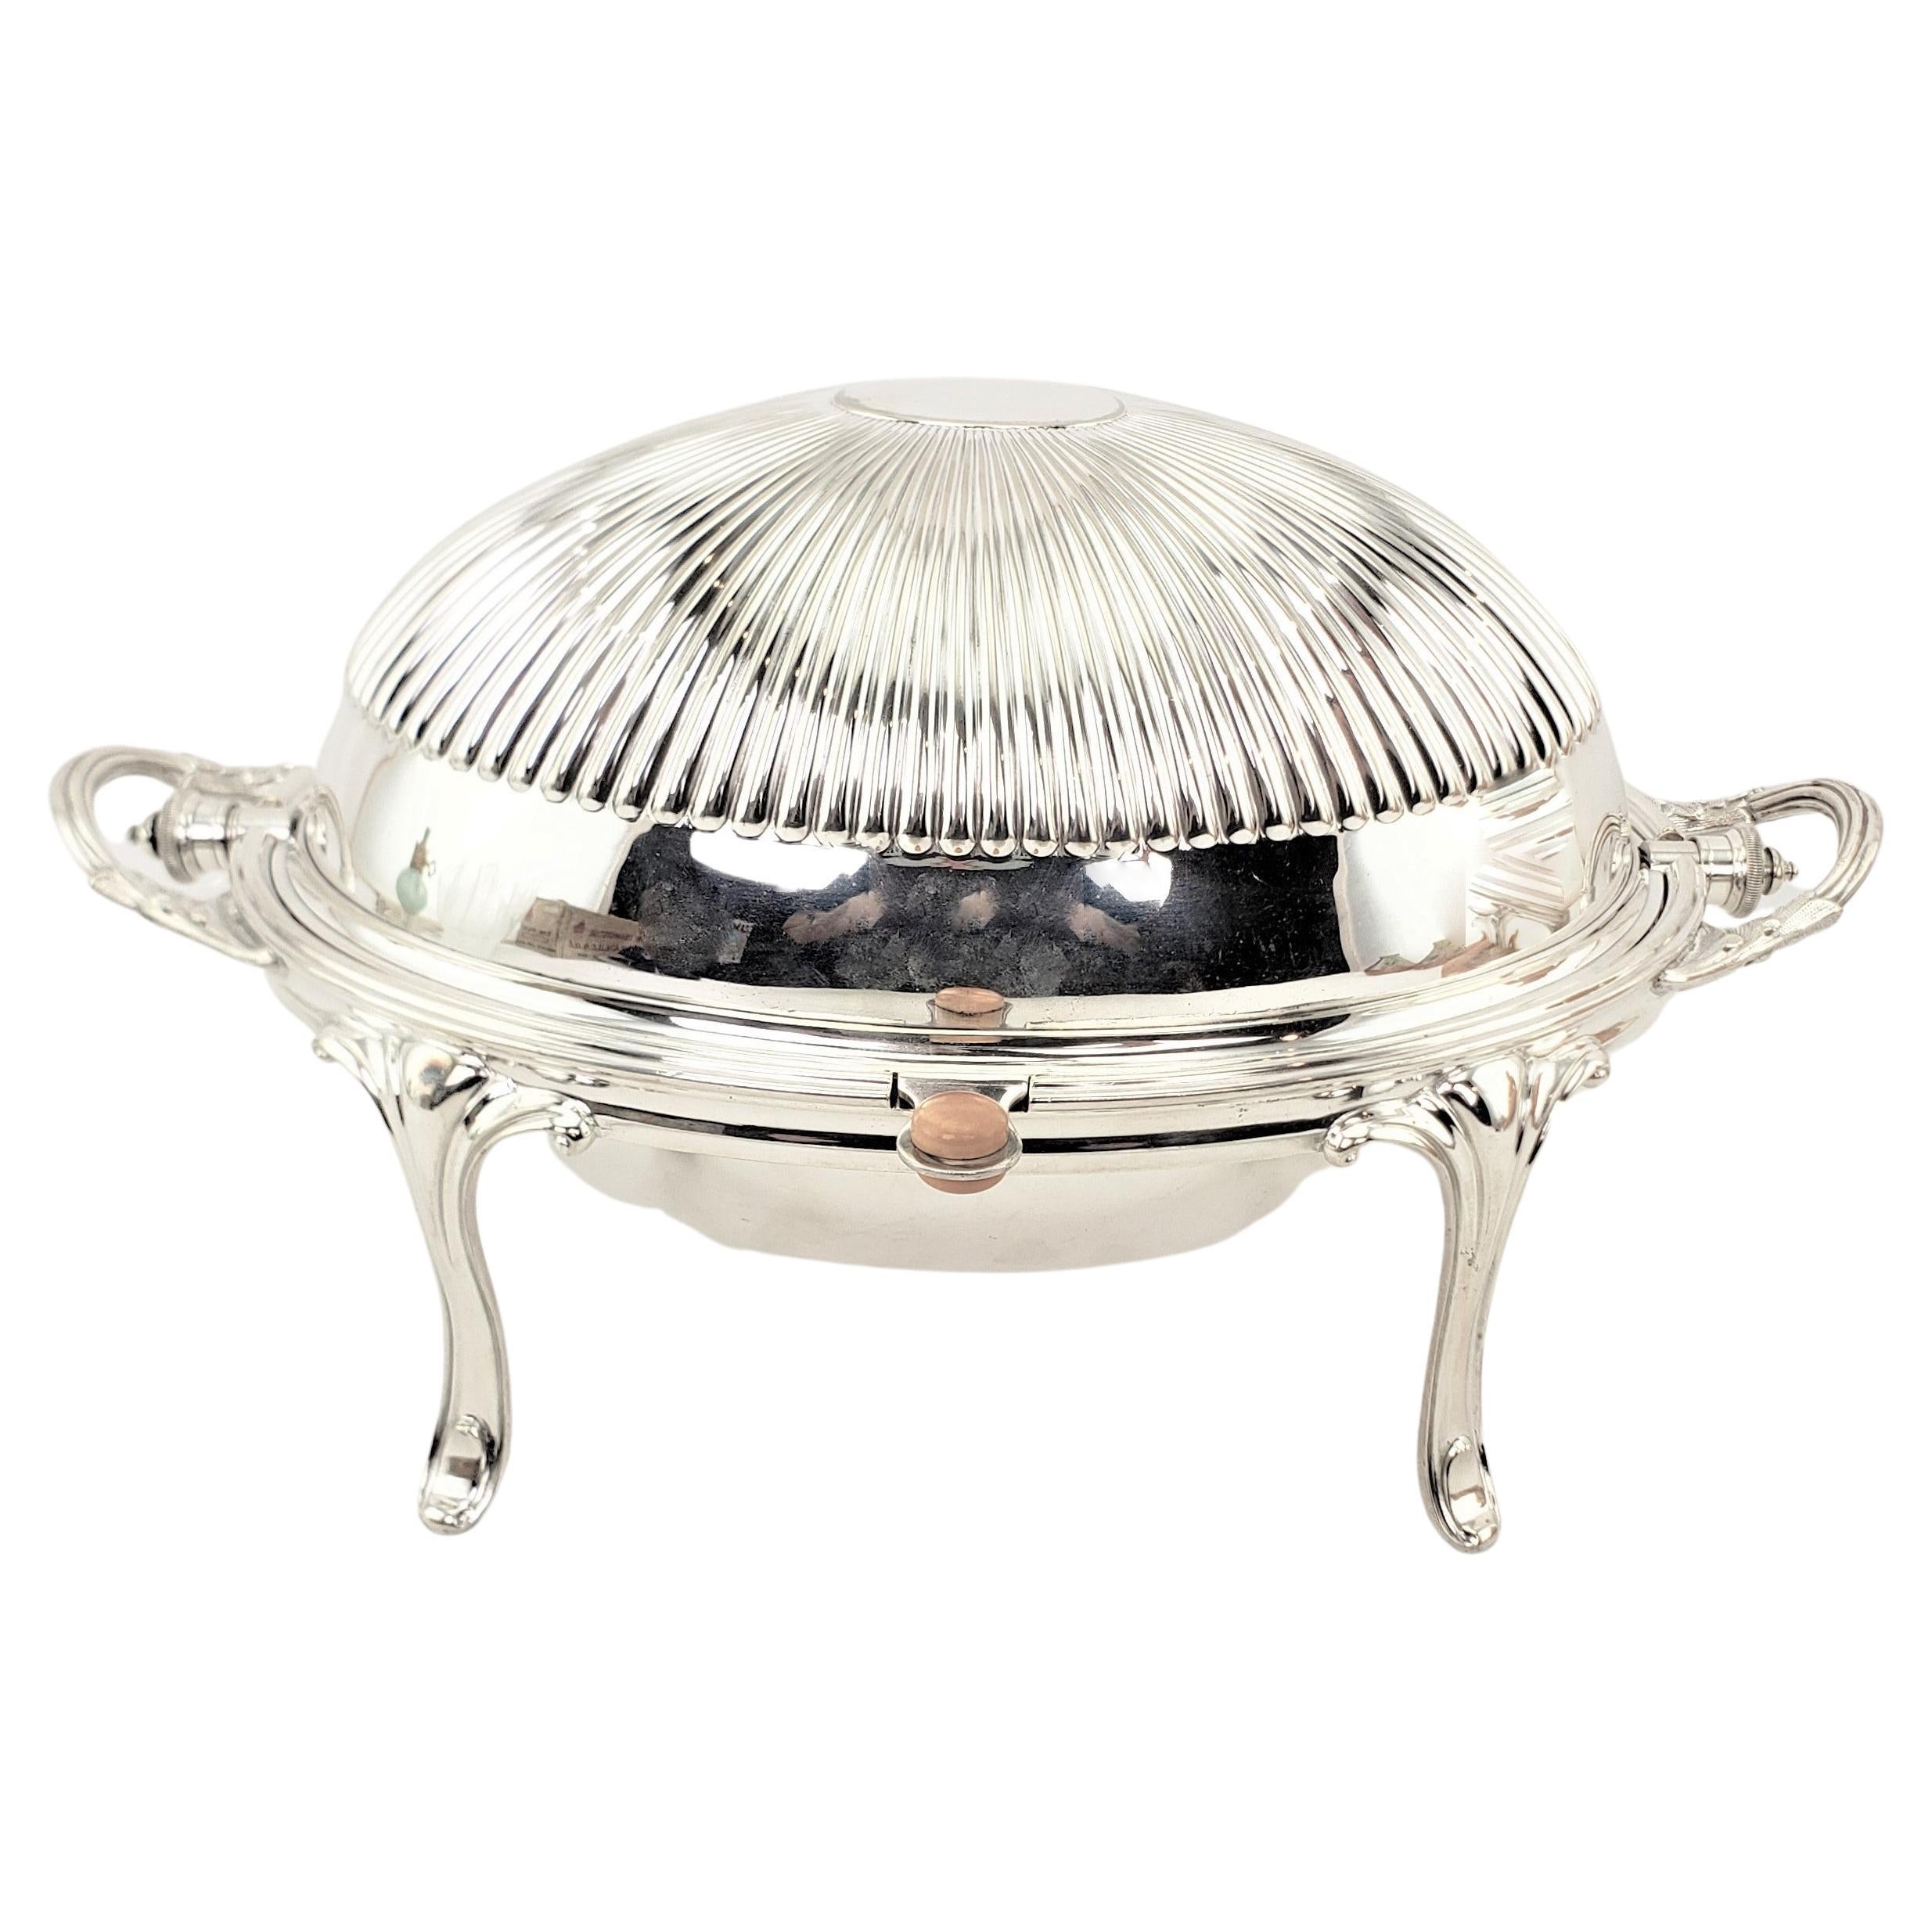 Antique English Silver Plated Domed Breakfast Warmer or Server